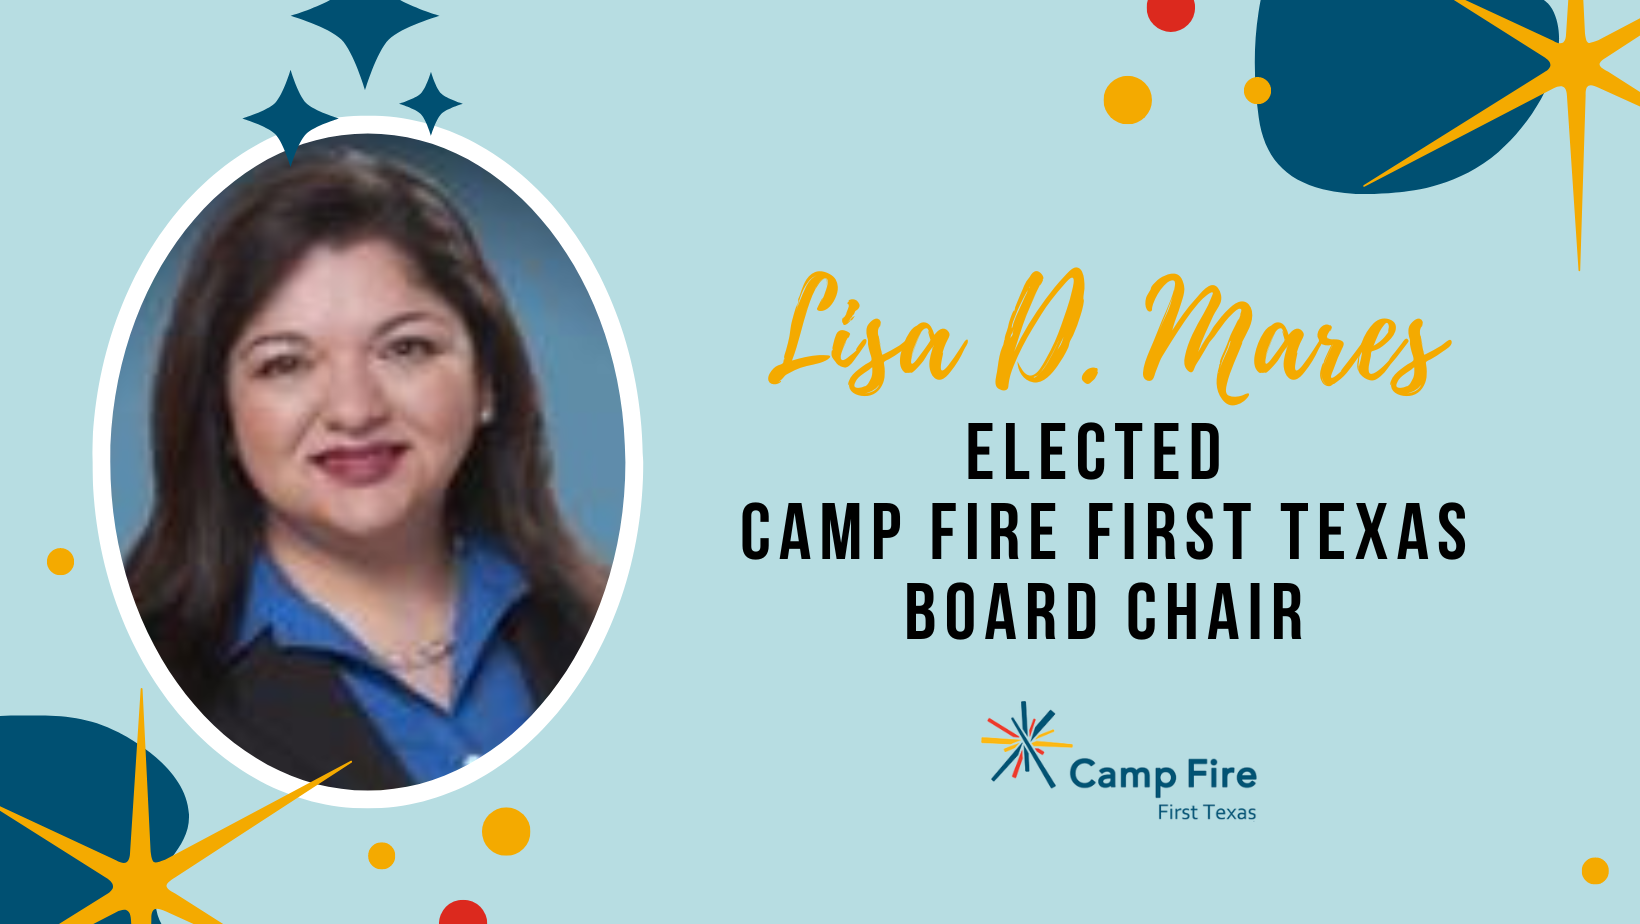 Lisa D. Mares Elected Camp Fire First Texas Board Chair